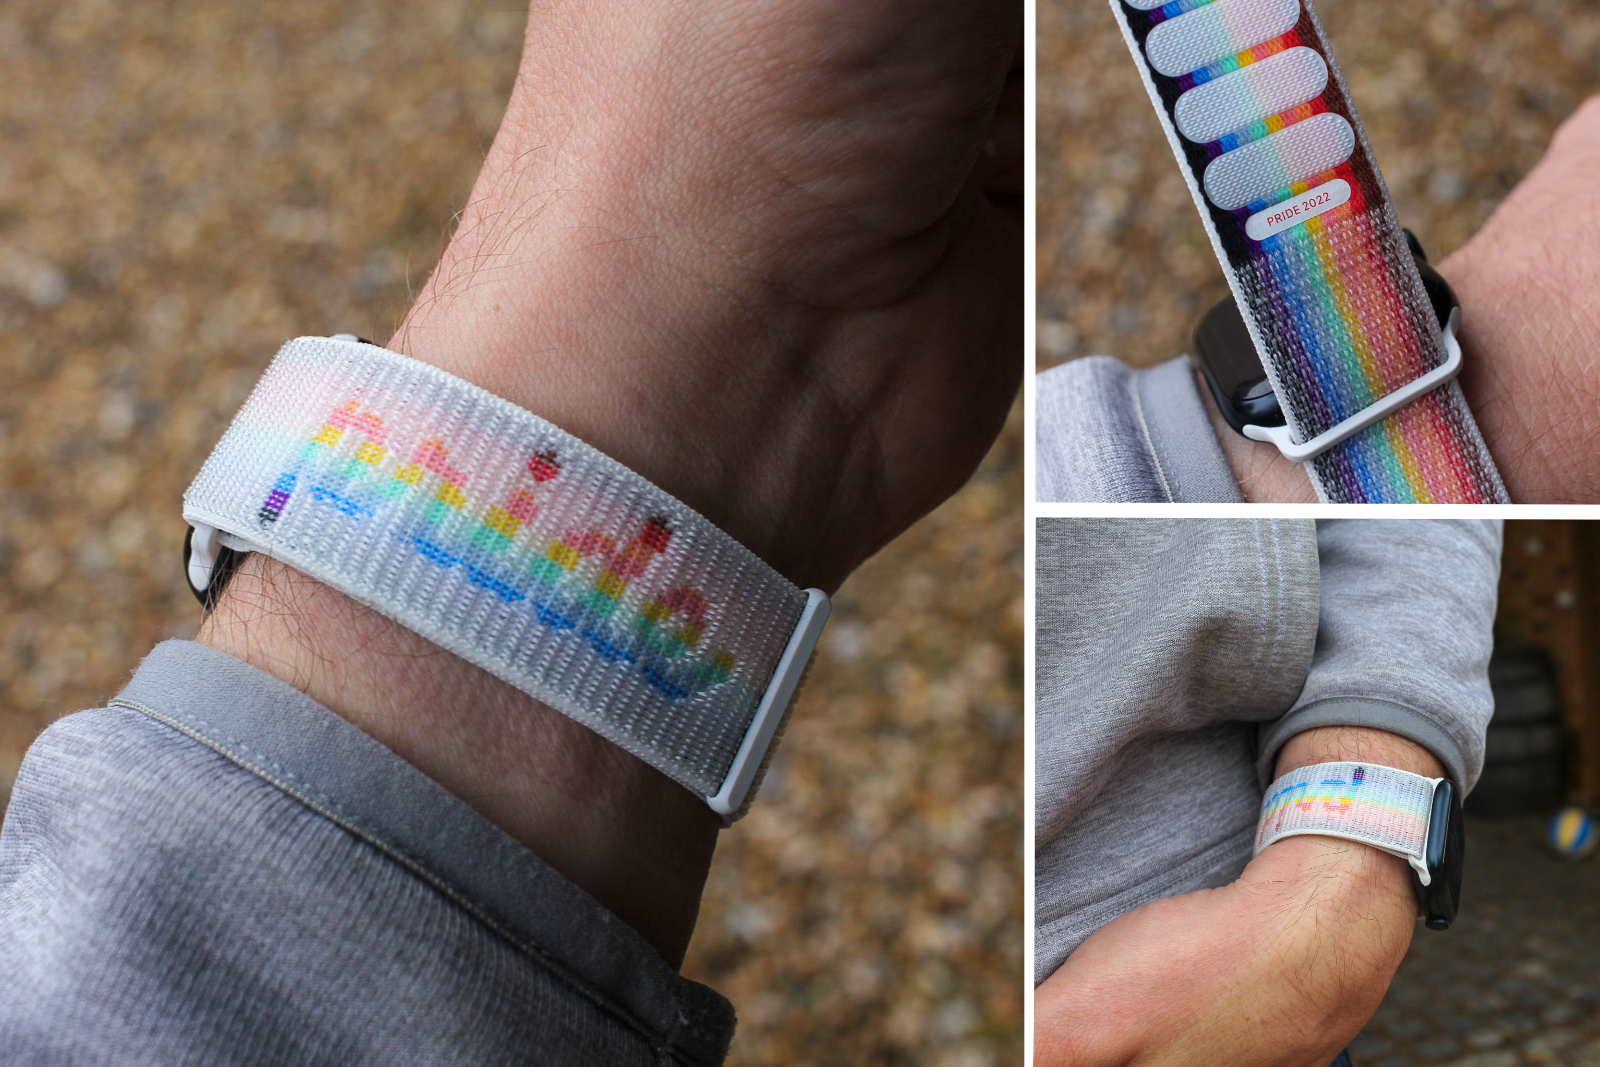 Apple celebrates Pride with rainbow Apple Watch bands and watch face photo 23